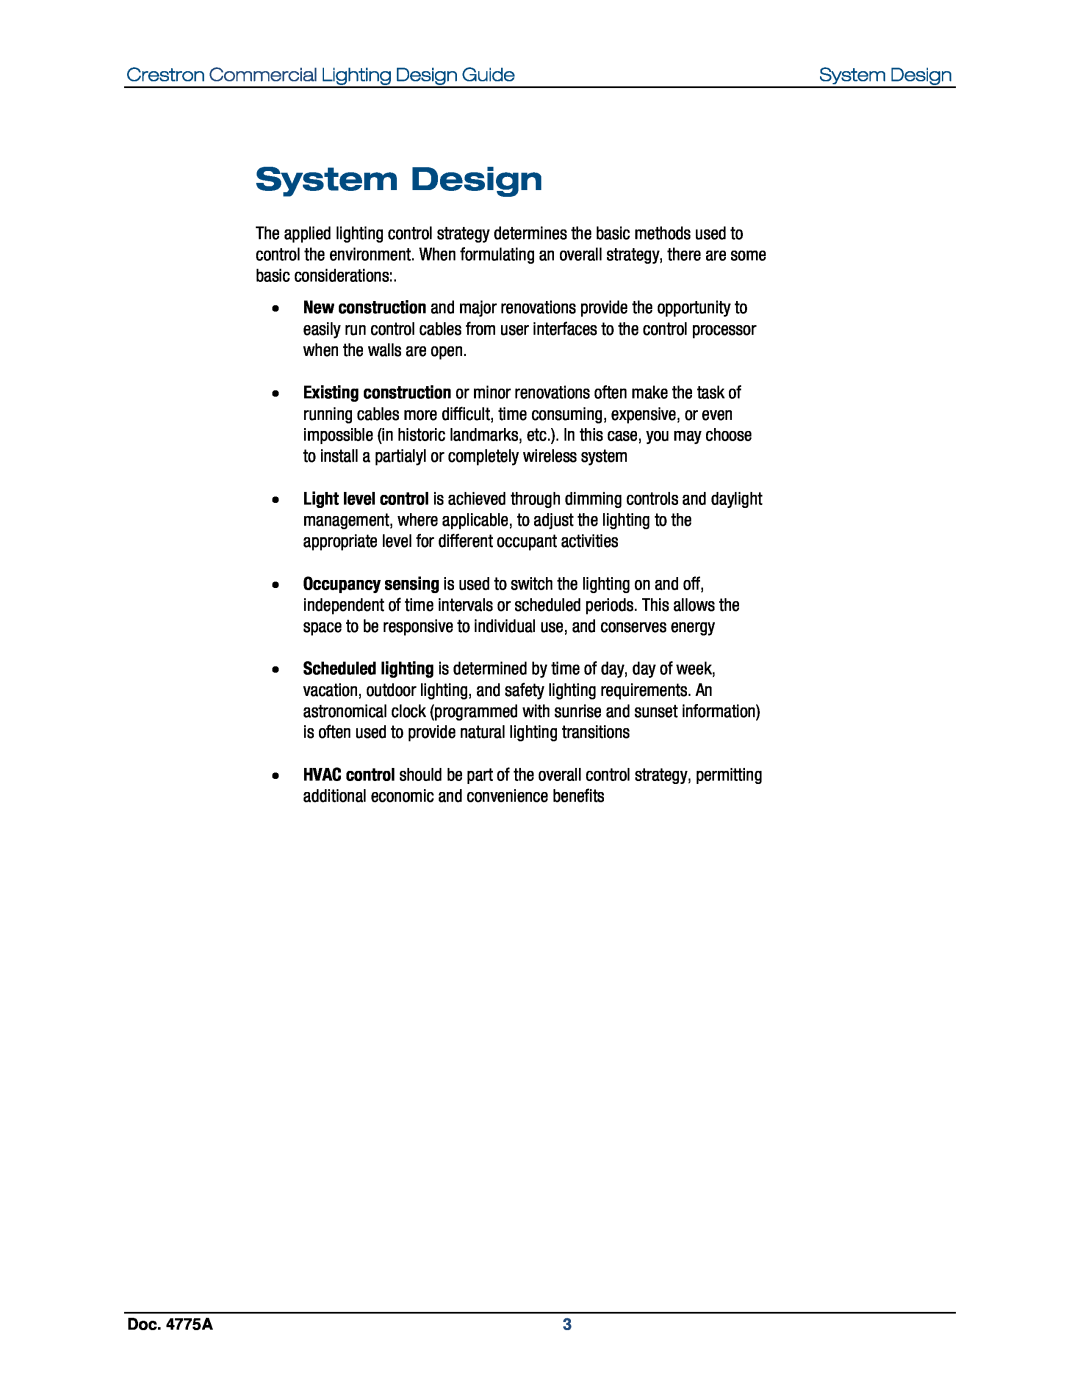 Crestron electronic IPAC-GL1, GLPS-SW-FT, GLPS-HSW, GLPS-HDSW-FT System Design, Crestron Commercial Lighting Design Guide 